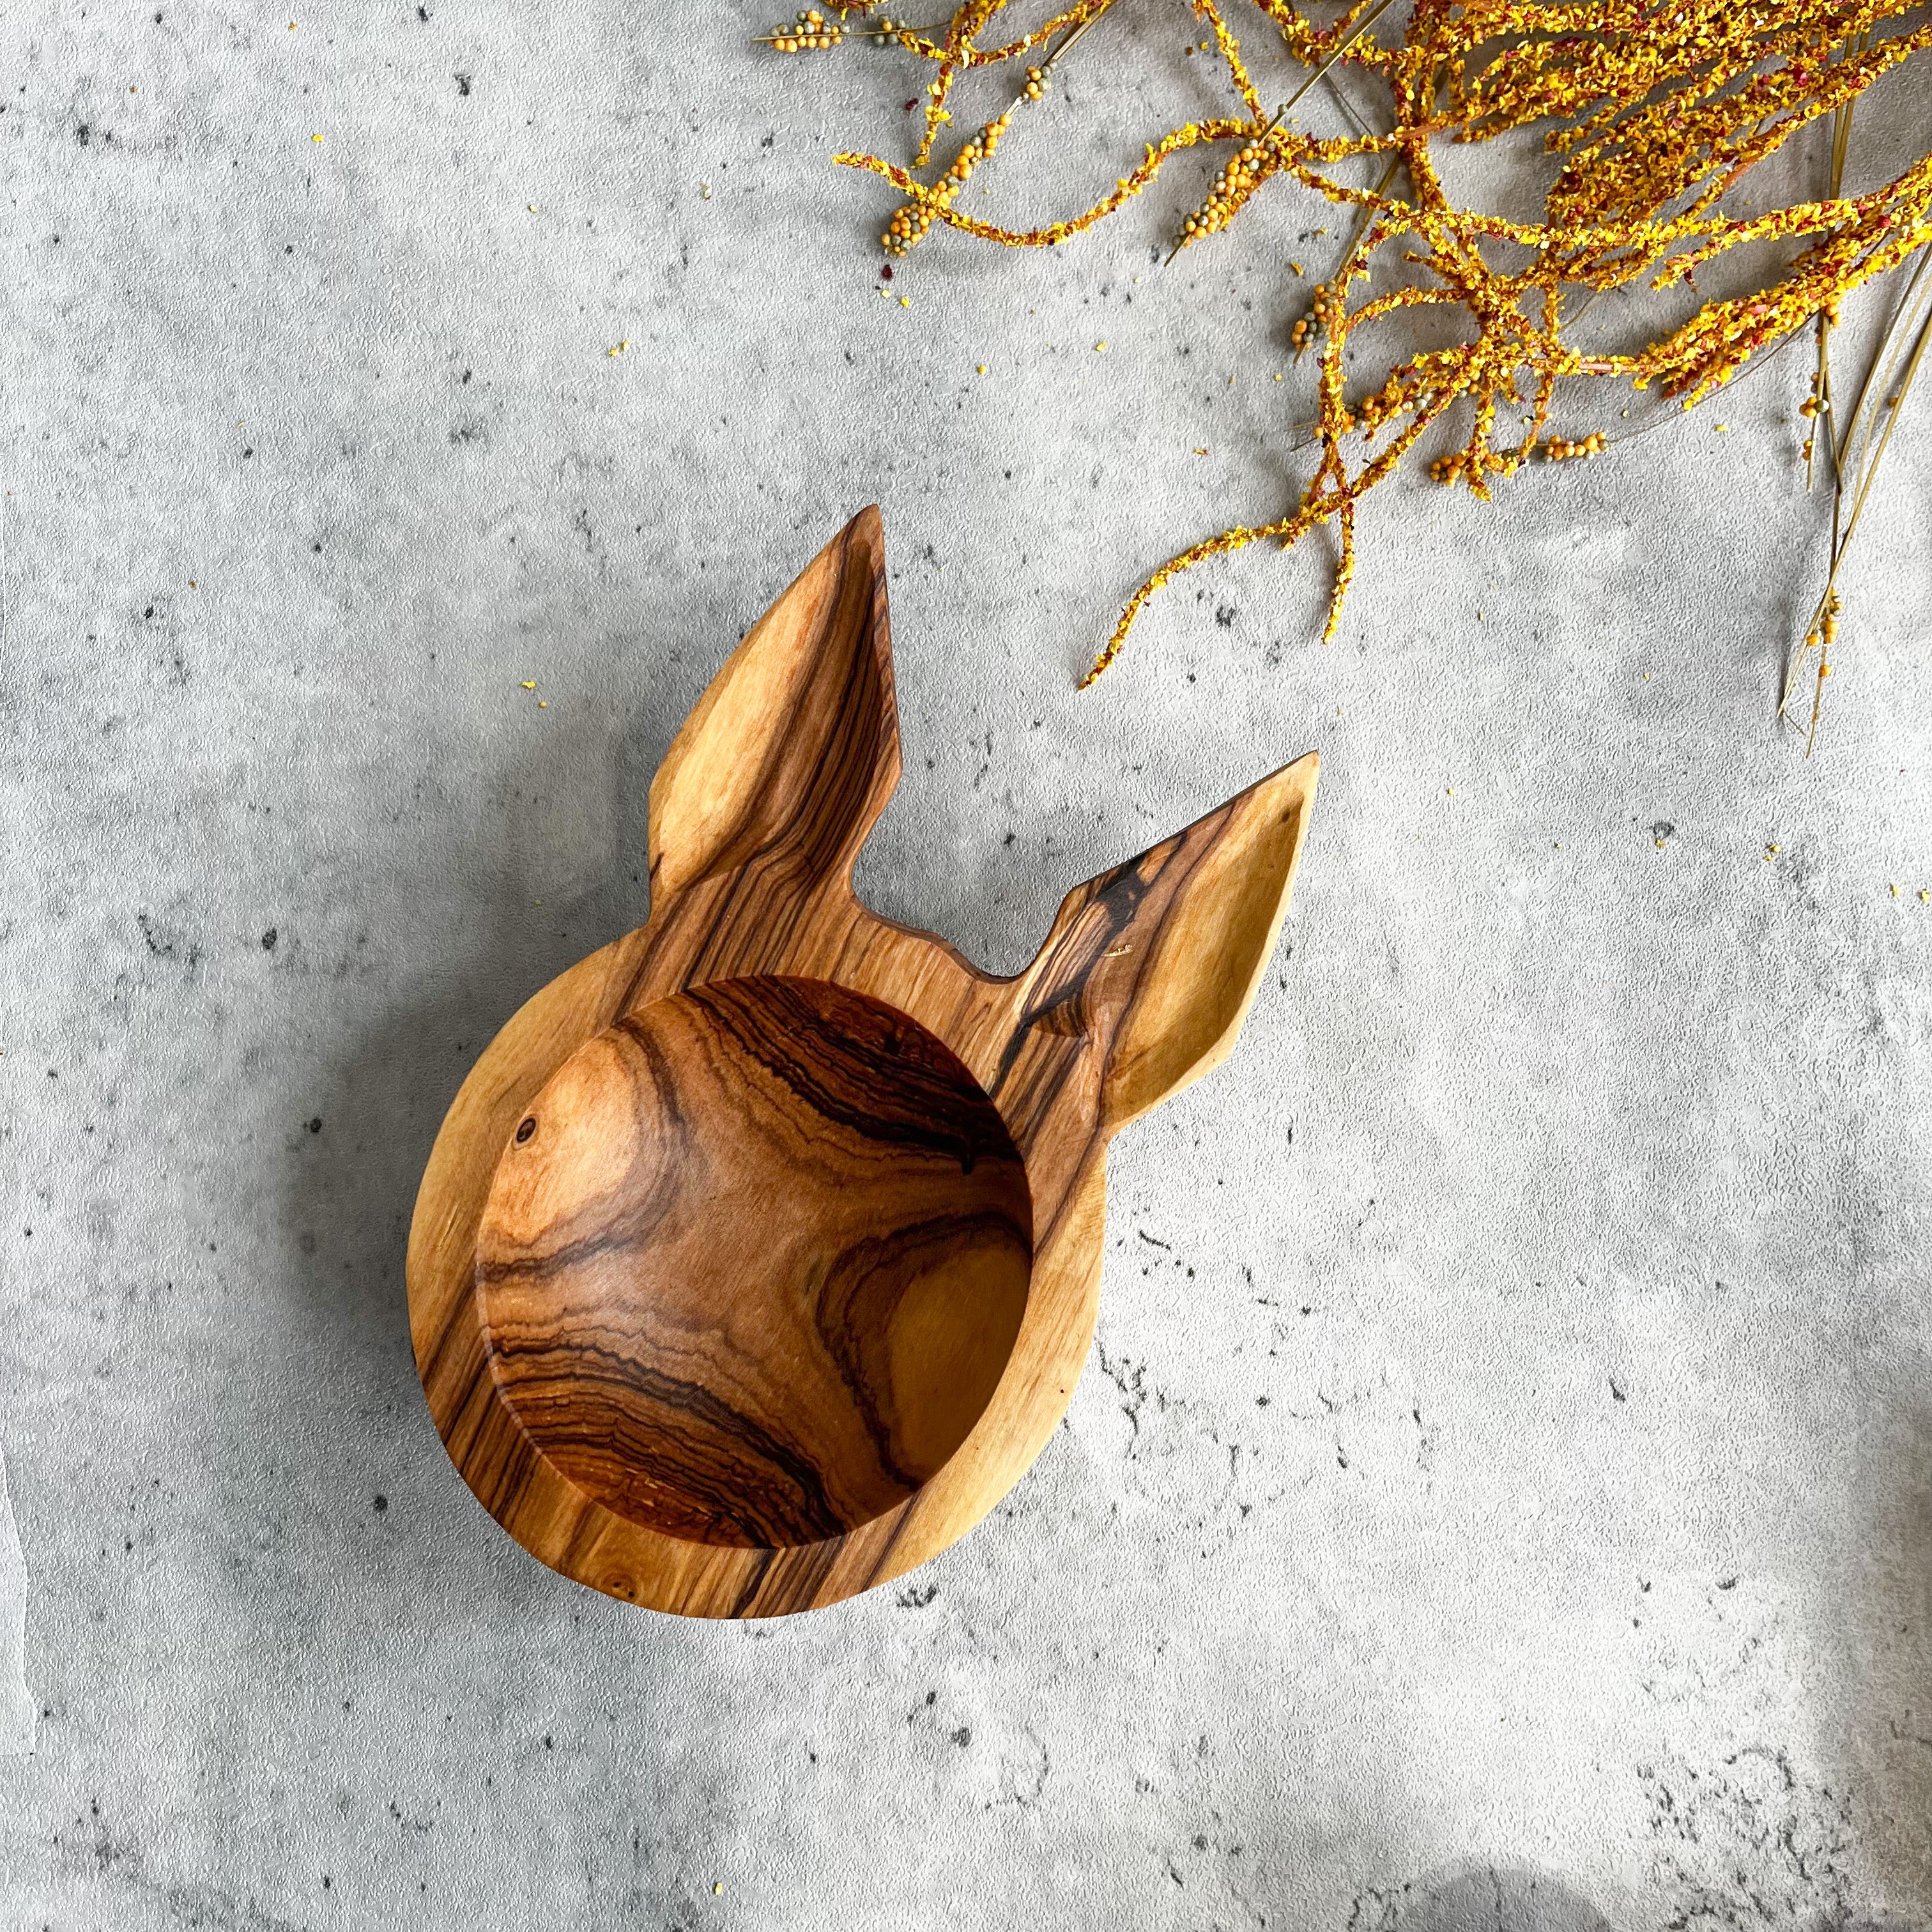 JustOne's small bunny shaped wooden bowl handcrafted in Kenya